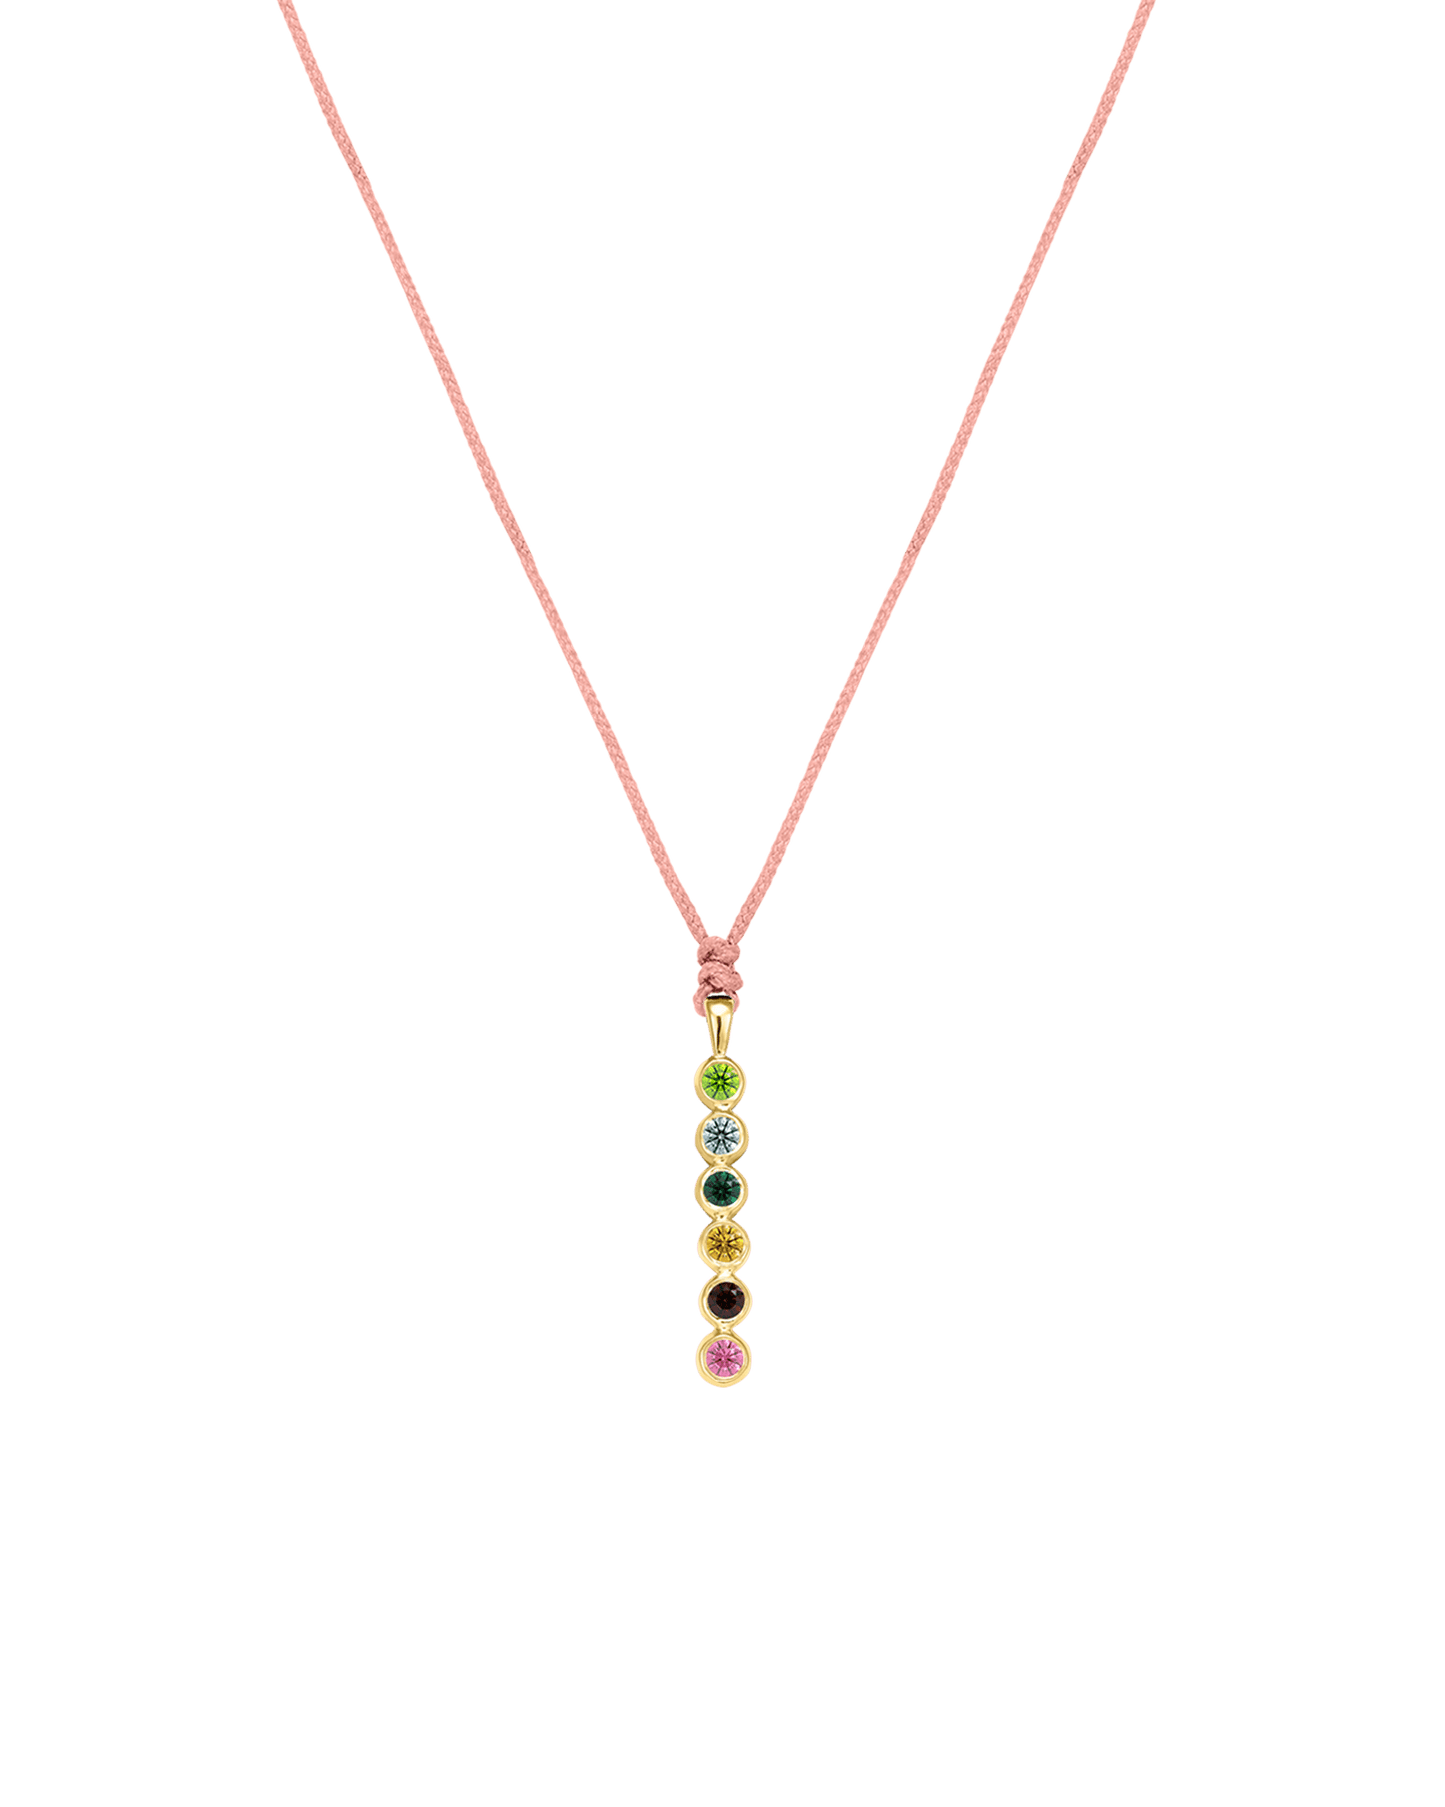 The Birthstones Bar Necklace - 14K Yellow Gold Necklaces 14K Solid Gold Pink 2 